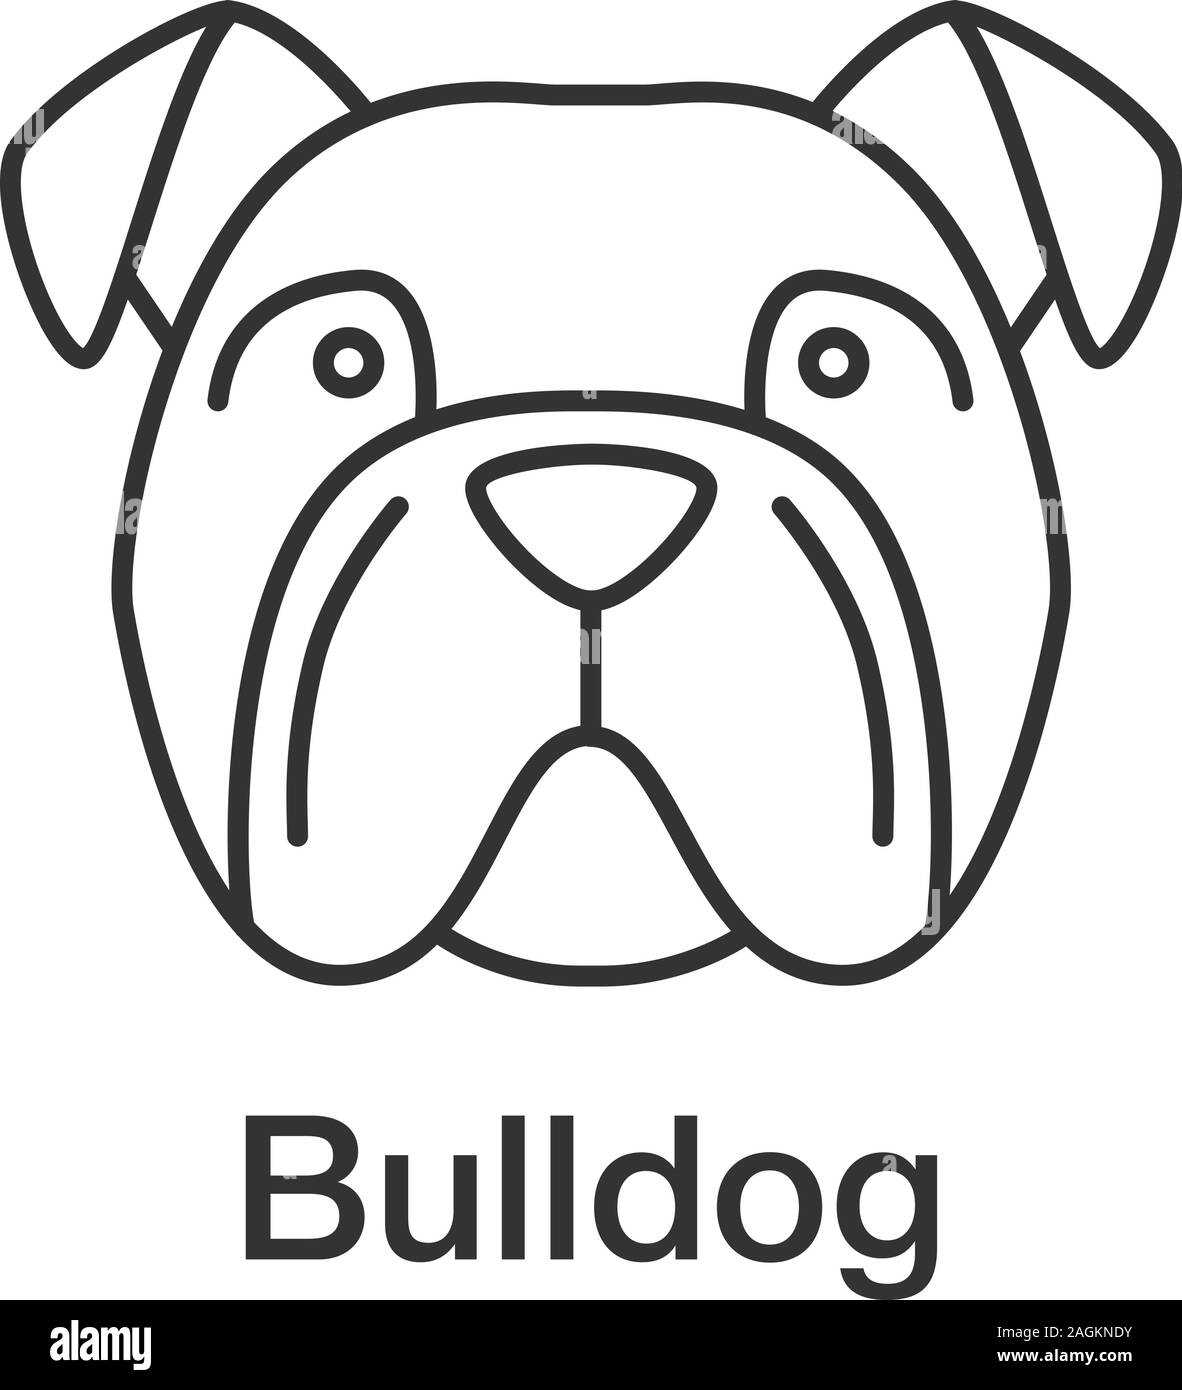 Bulldog Drawings In Black And White